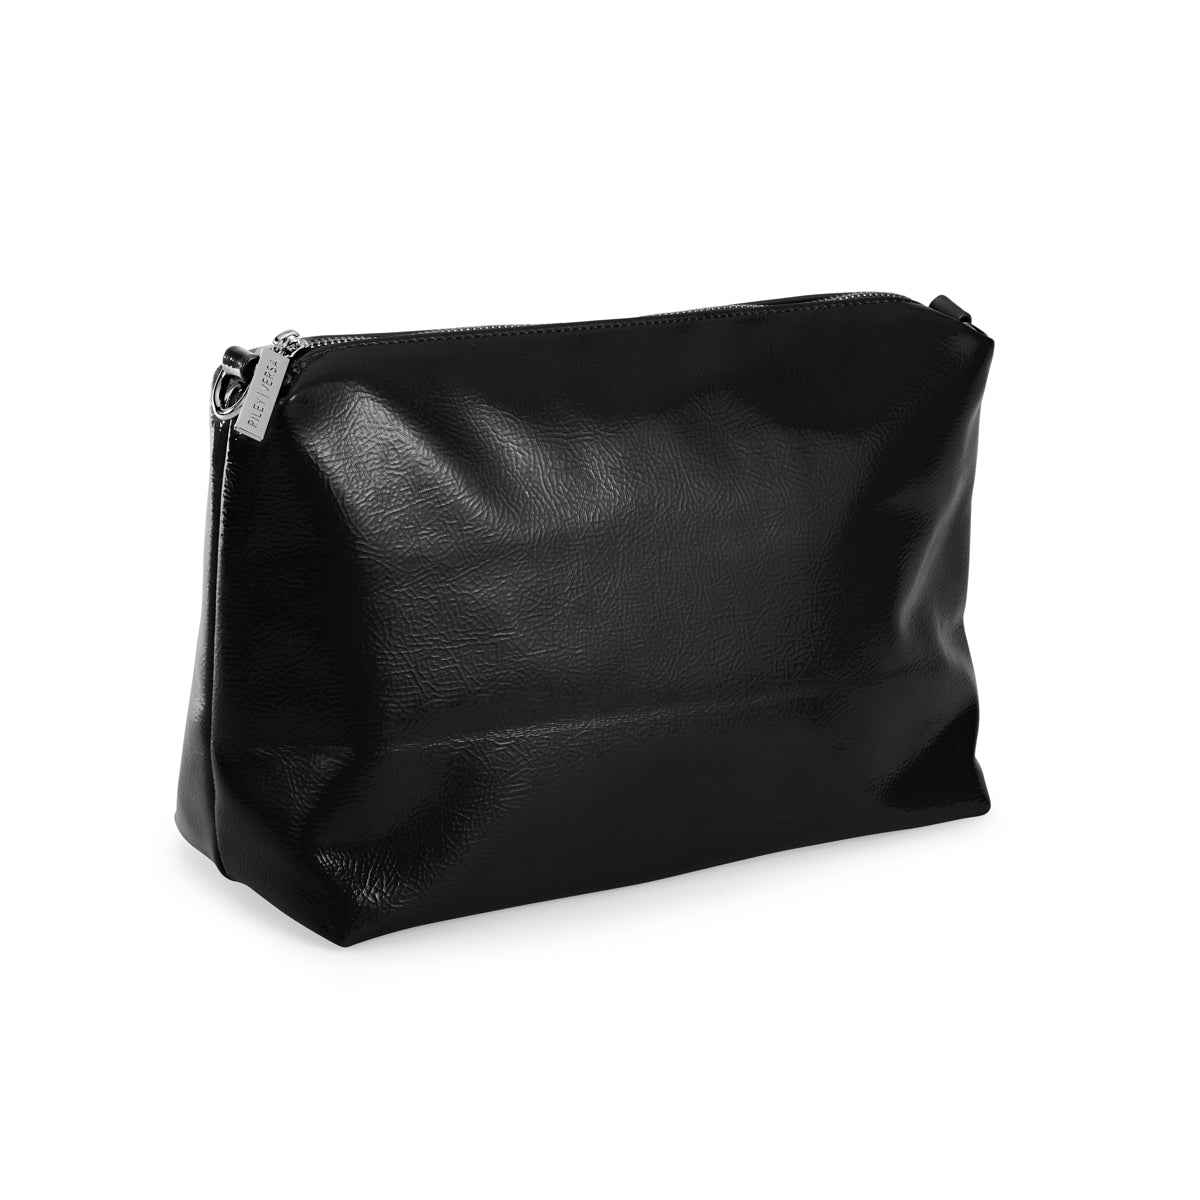 Black Patent Leather Pouch – RILEY VERSA